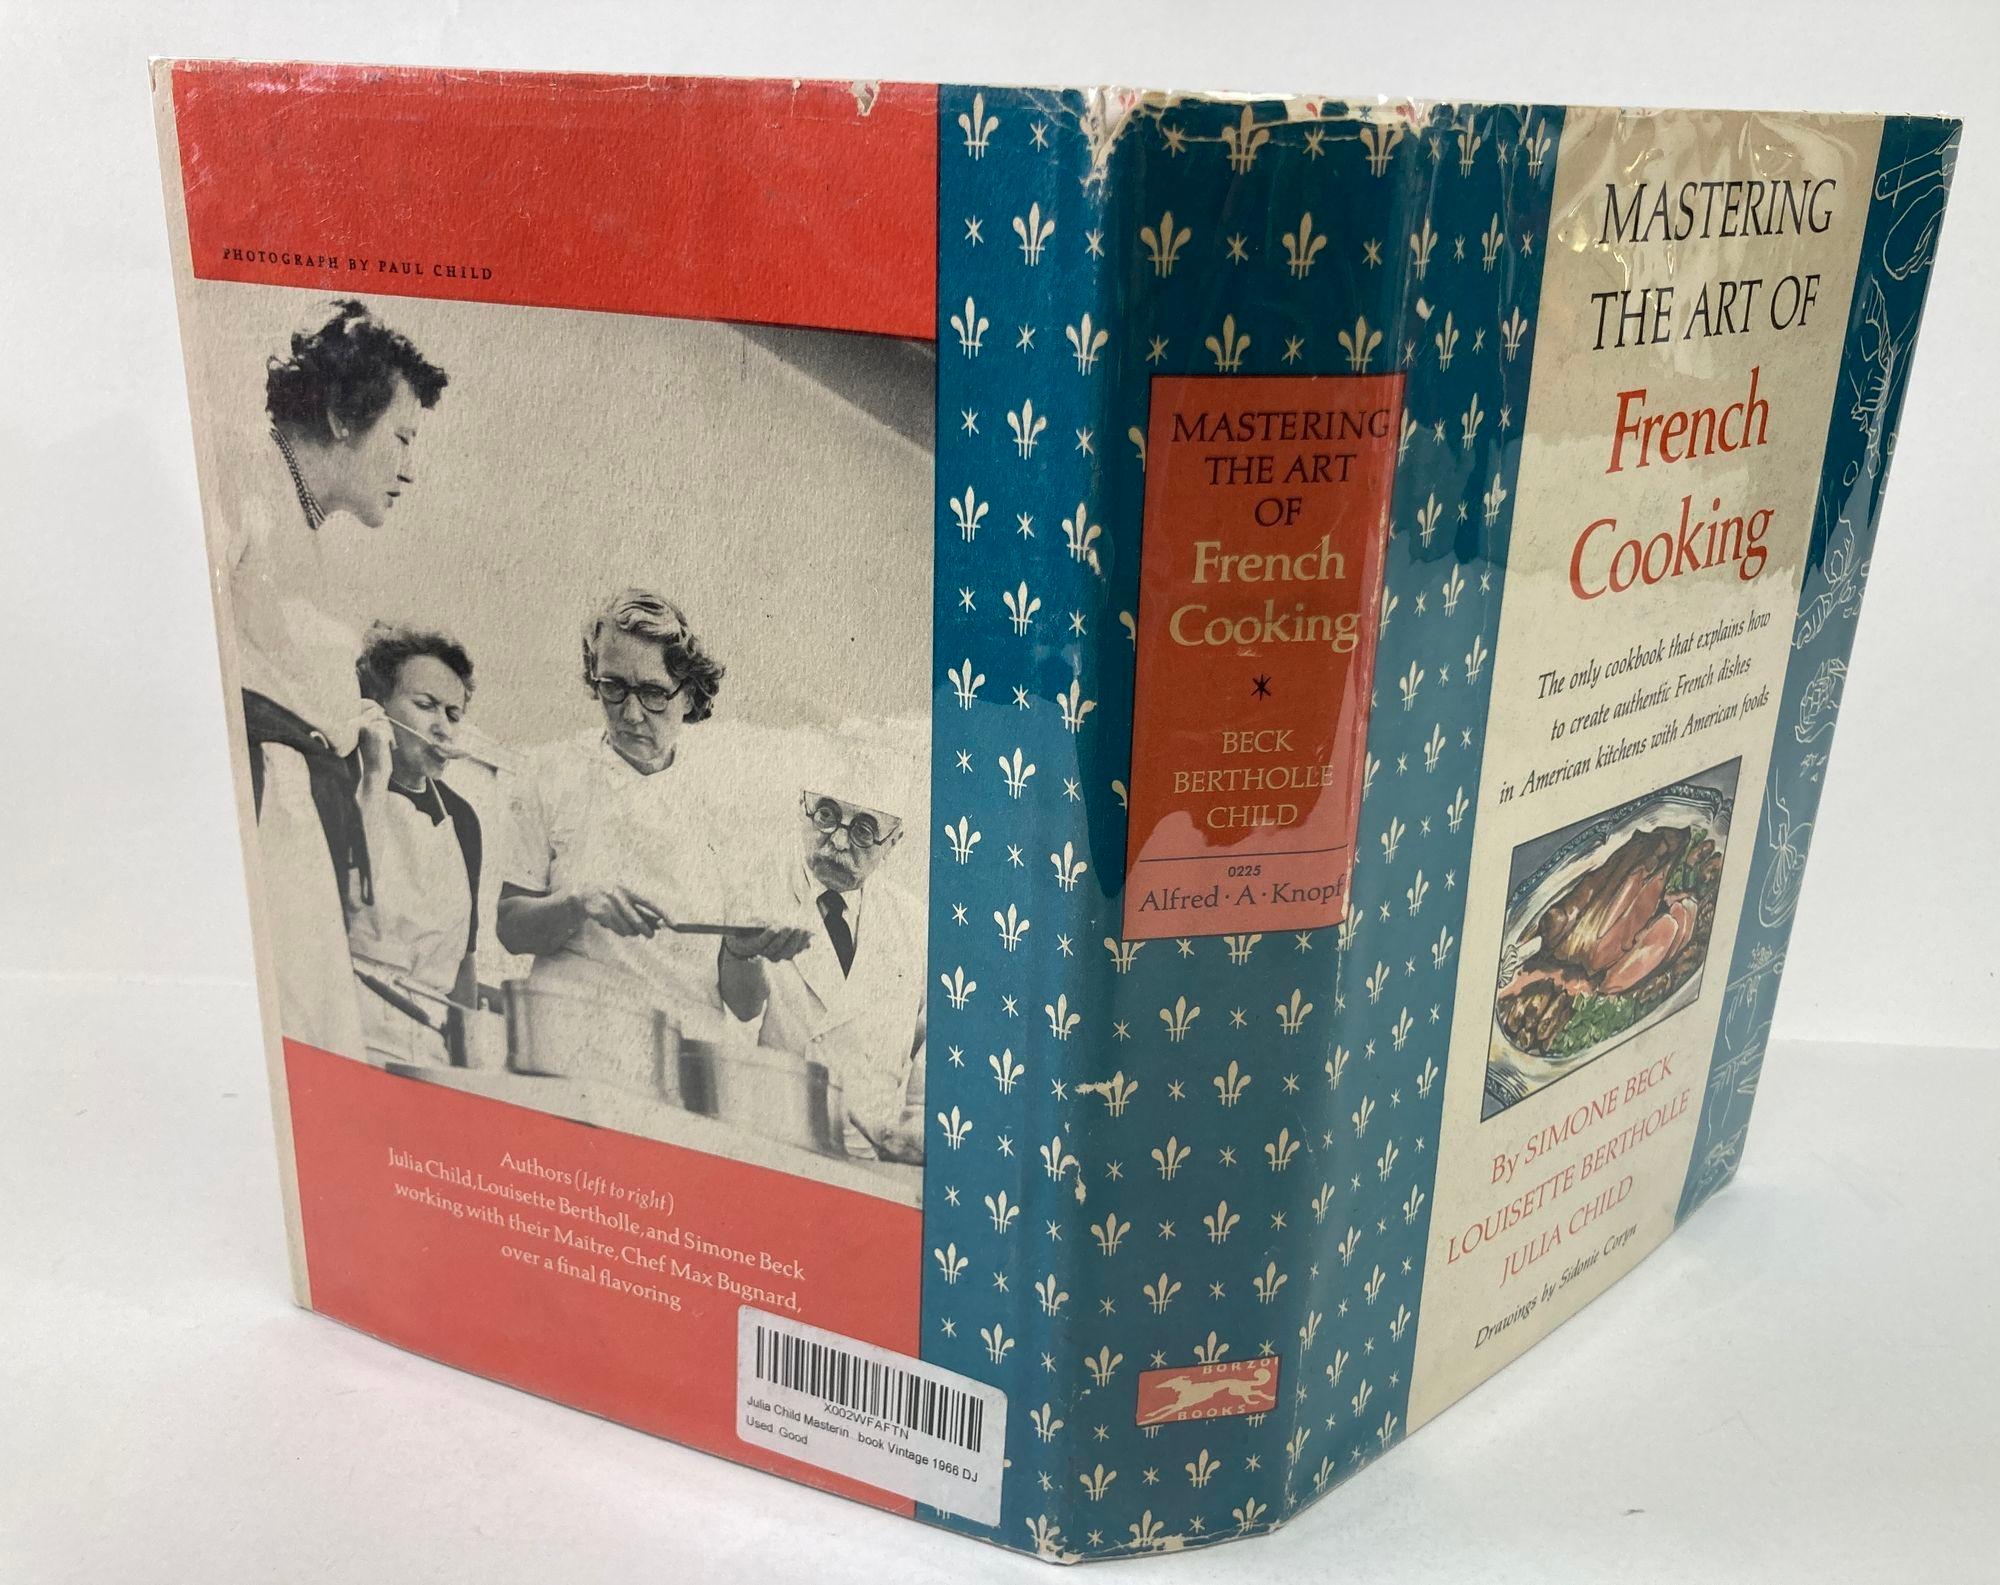 Julia Child MASTERING THE ART OF FRENCH COOKING VOL. ONE
New York: Alfred A. Knopf. First Publishing 1961; Sixth Printing 1964. Hardcover. 
Autographed from Maitland Martinez to Bob Mausteeler March 21st 1965
Condition: Few small open tears along